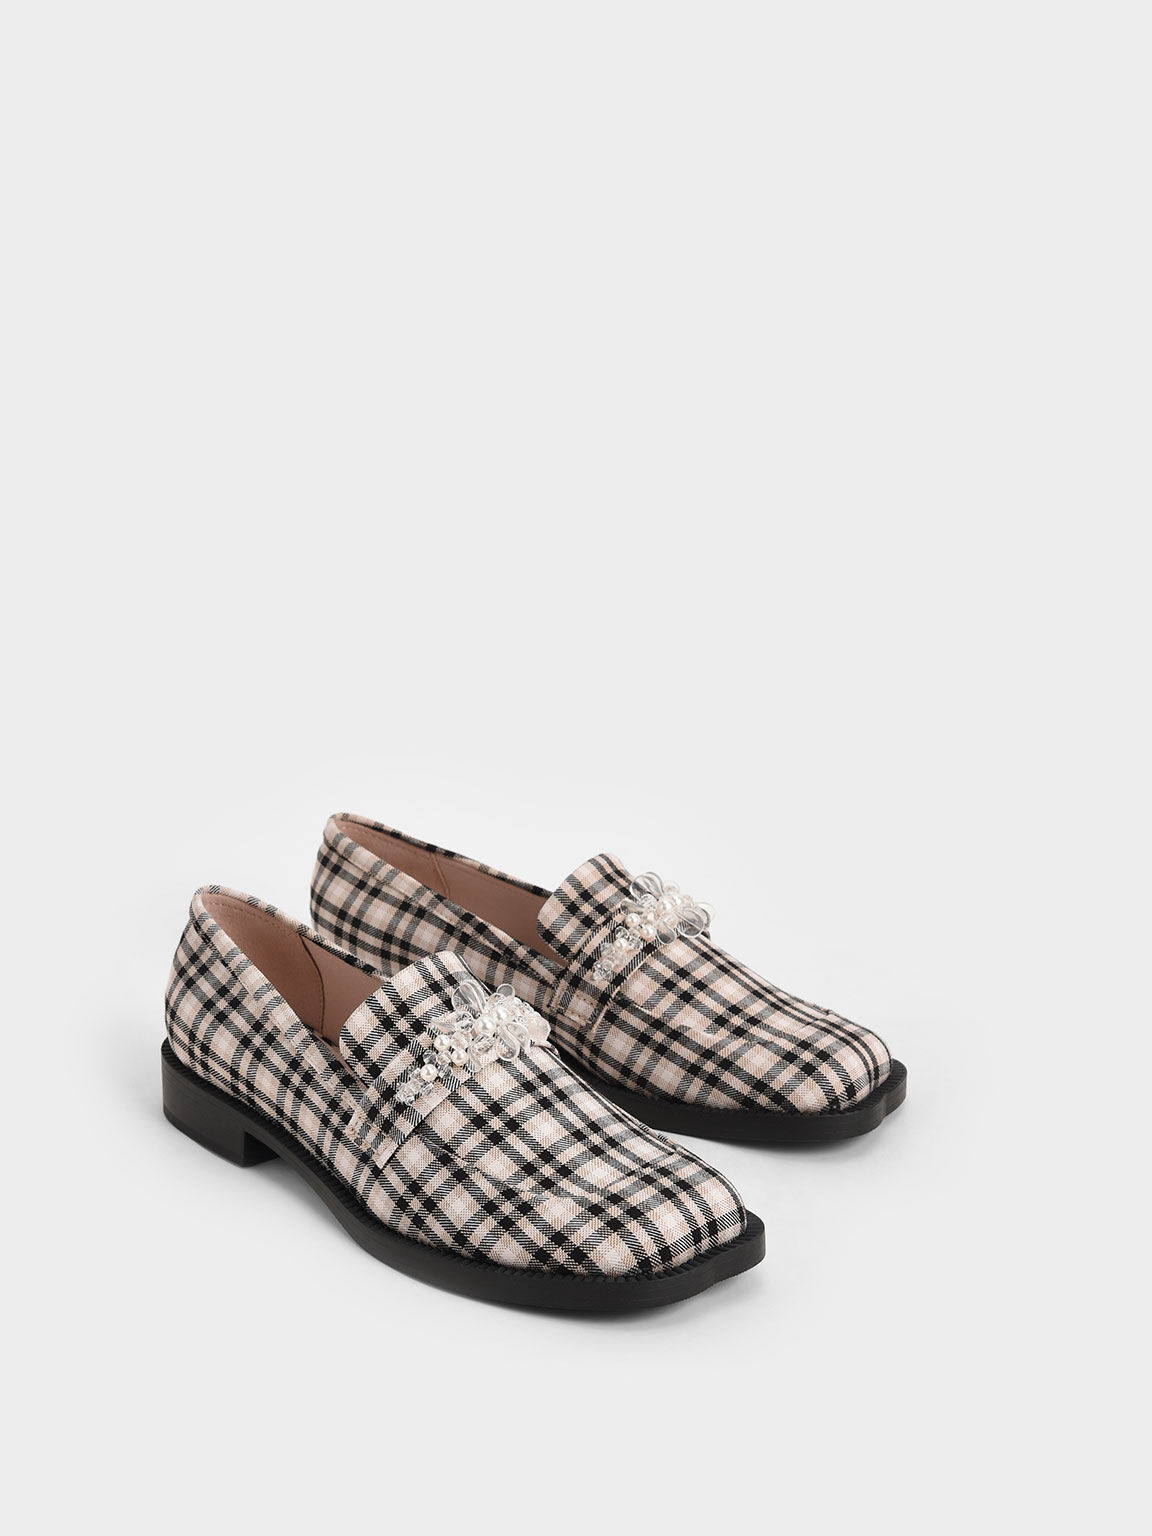 Bead-Embellished Check-Print Penny Loafers, Multi, hi-res